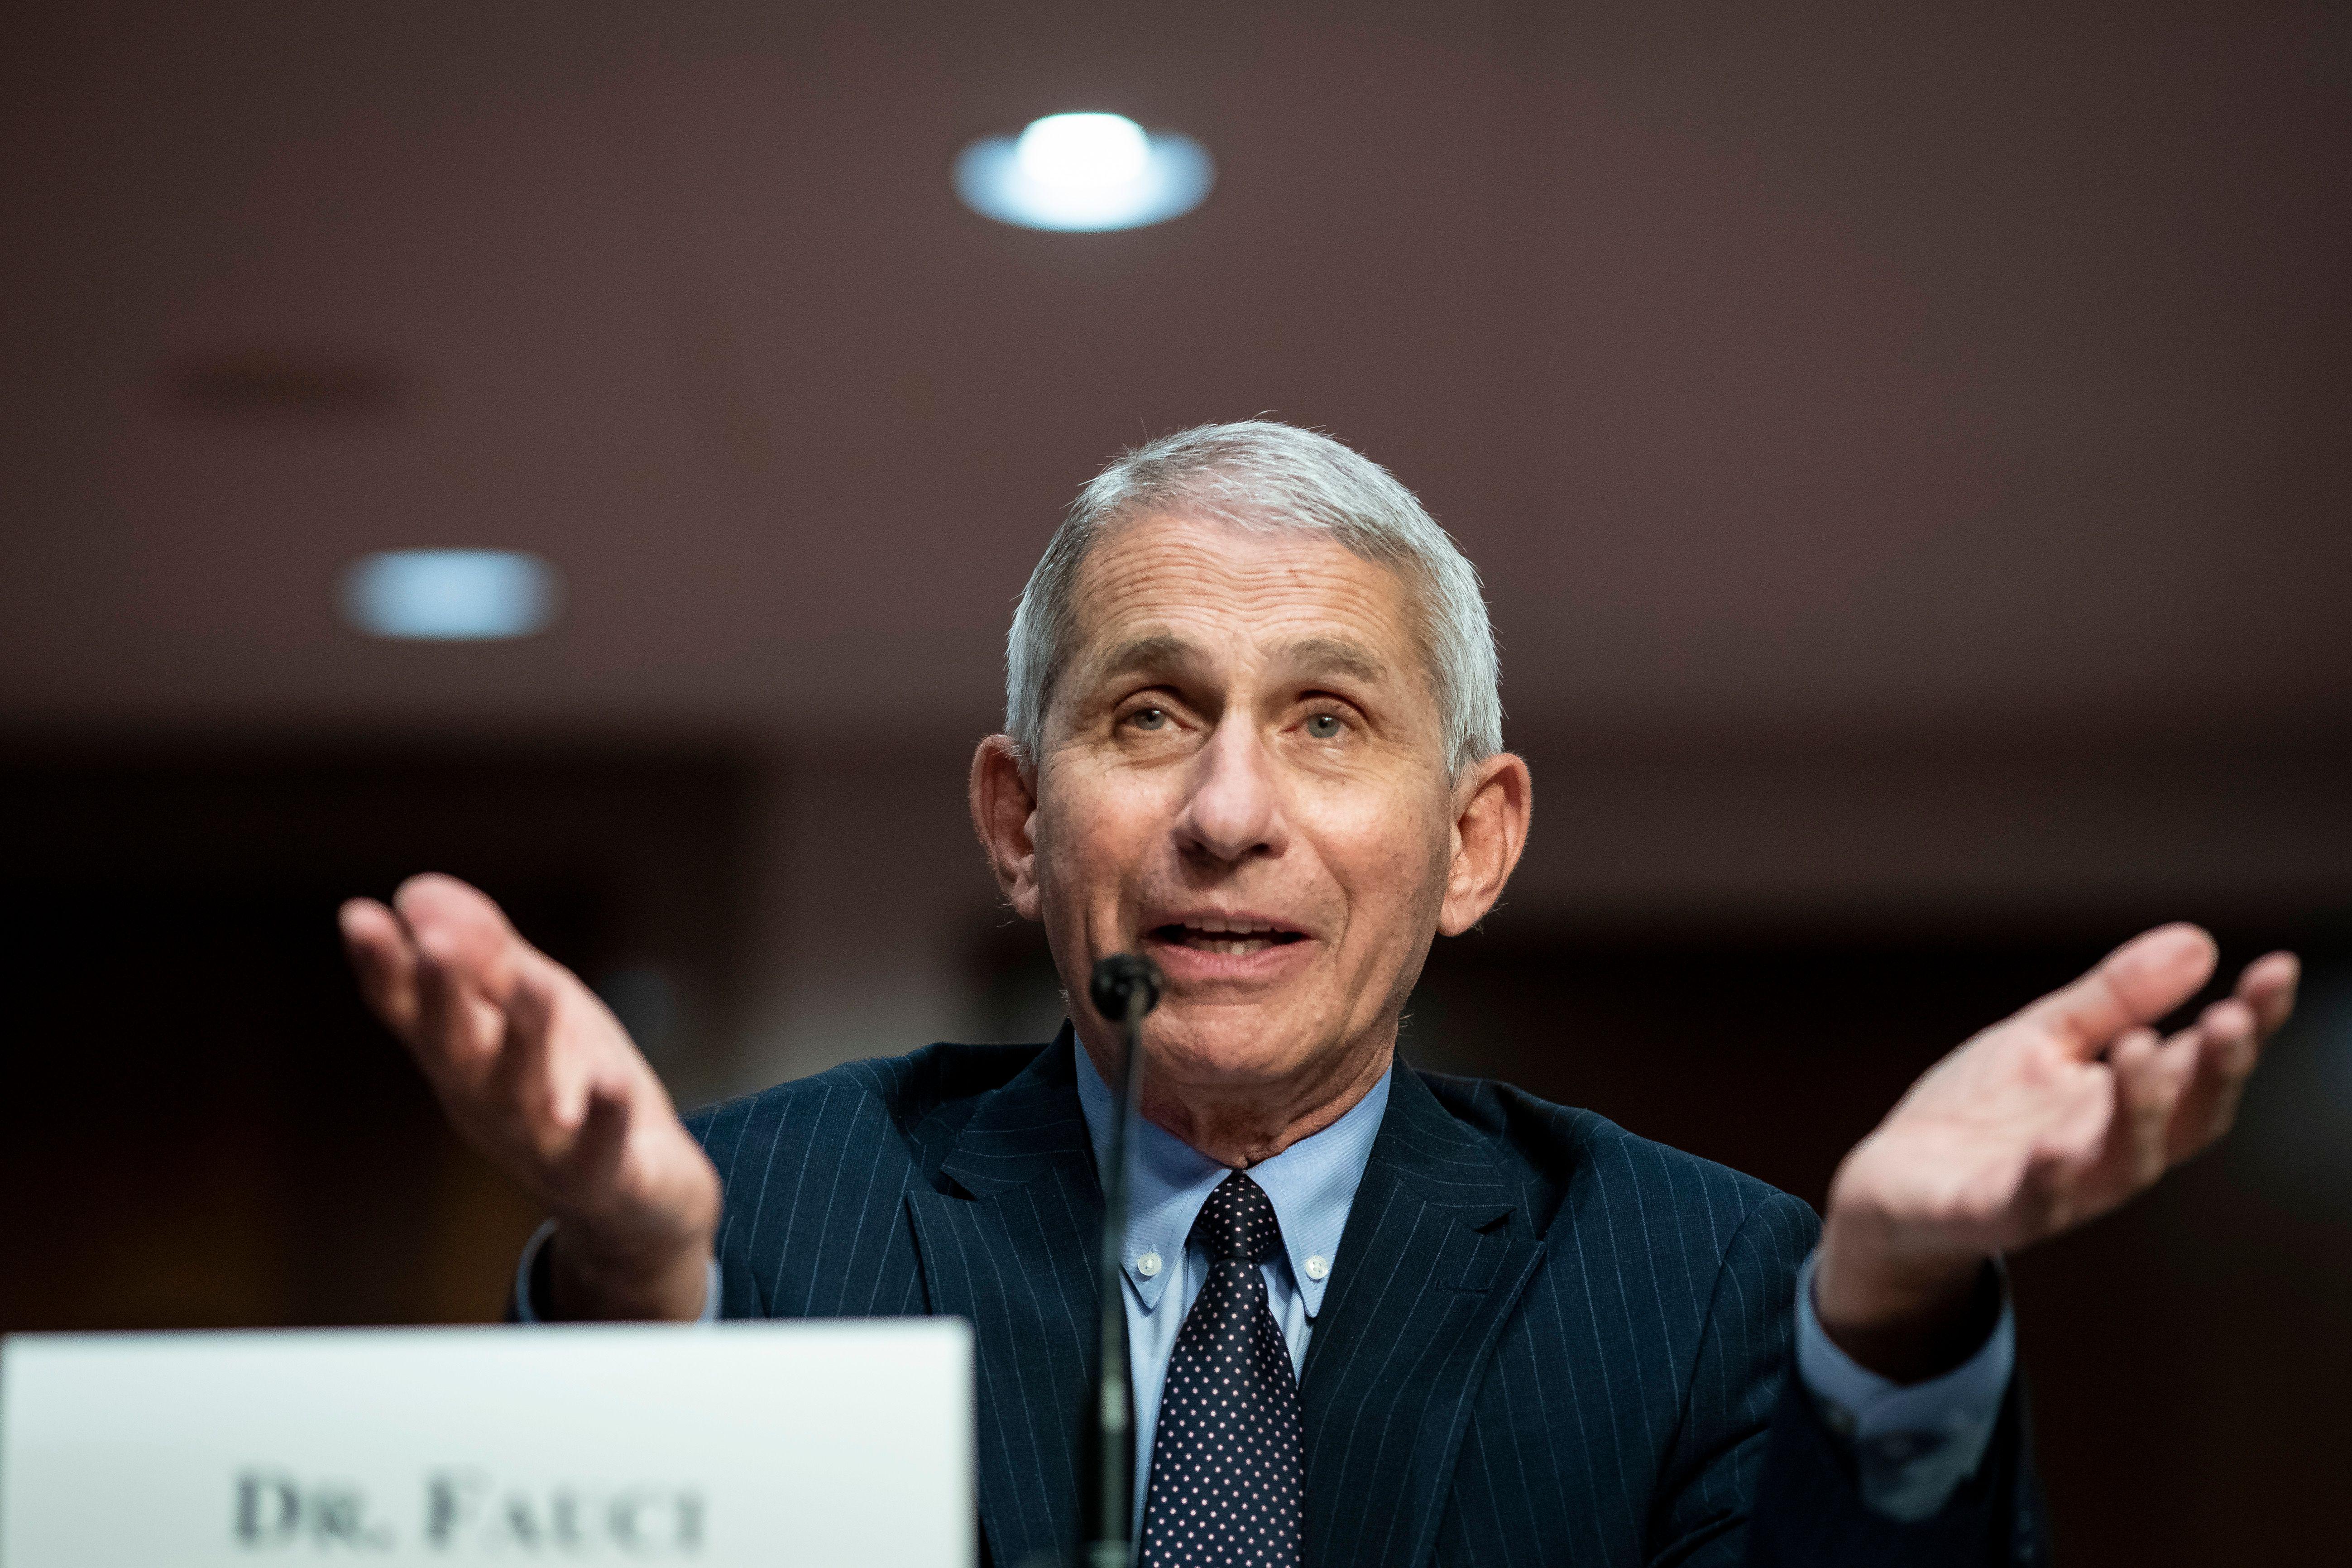 Fauci gestures while speaking at a mic